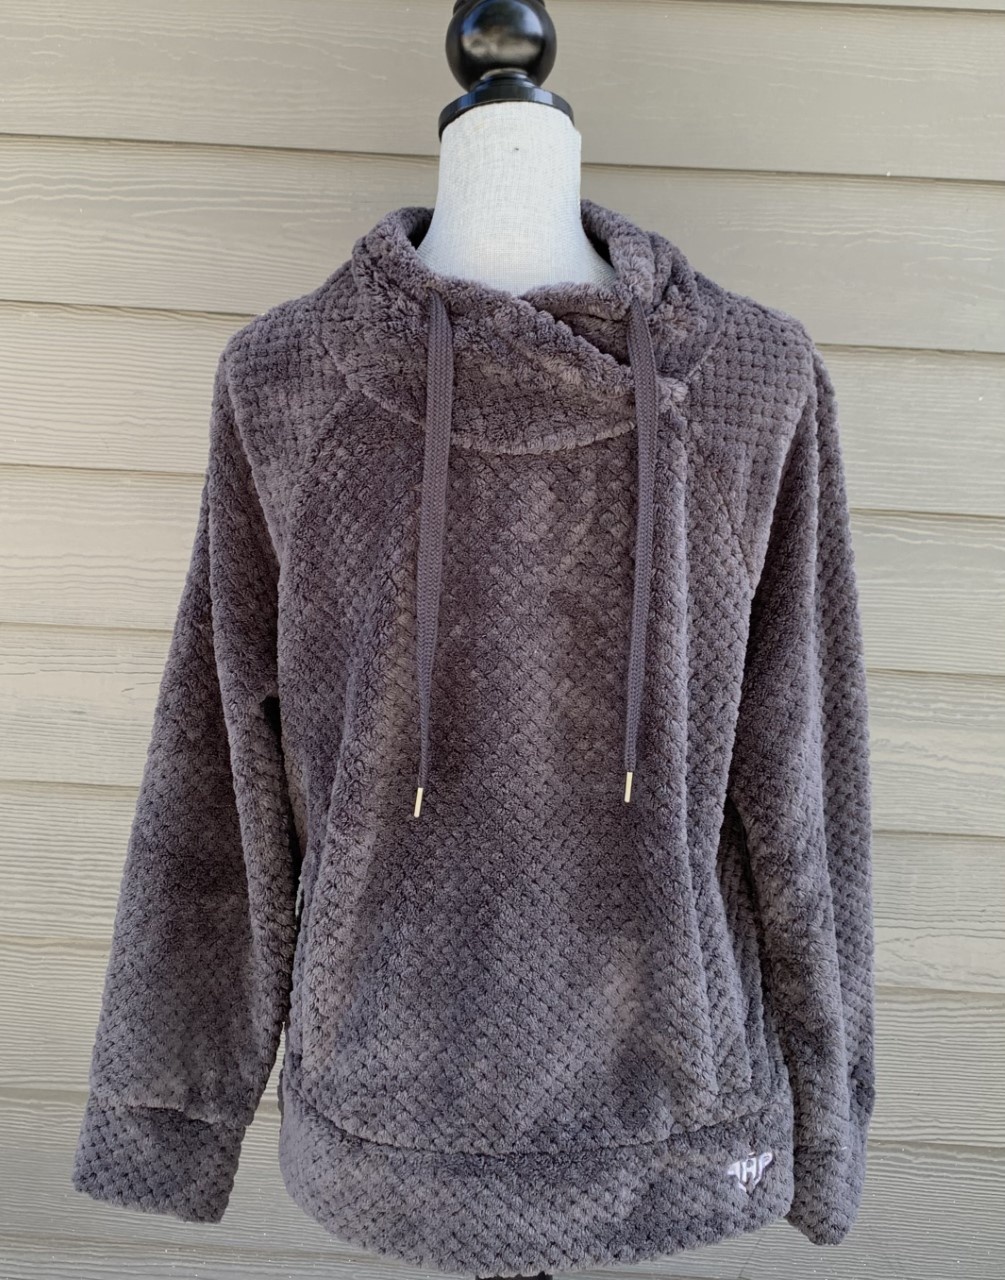 Member Plush Pullover with Pockets & LHP logo 21